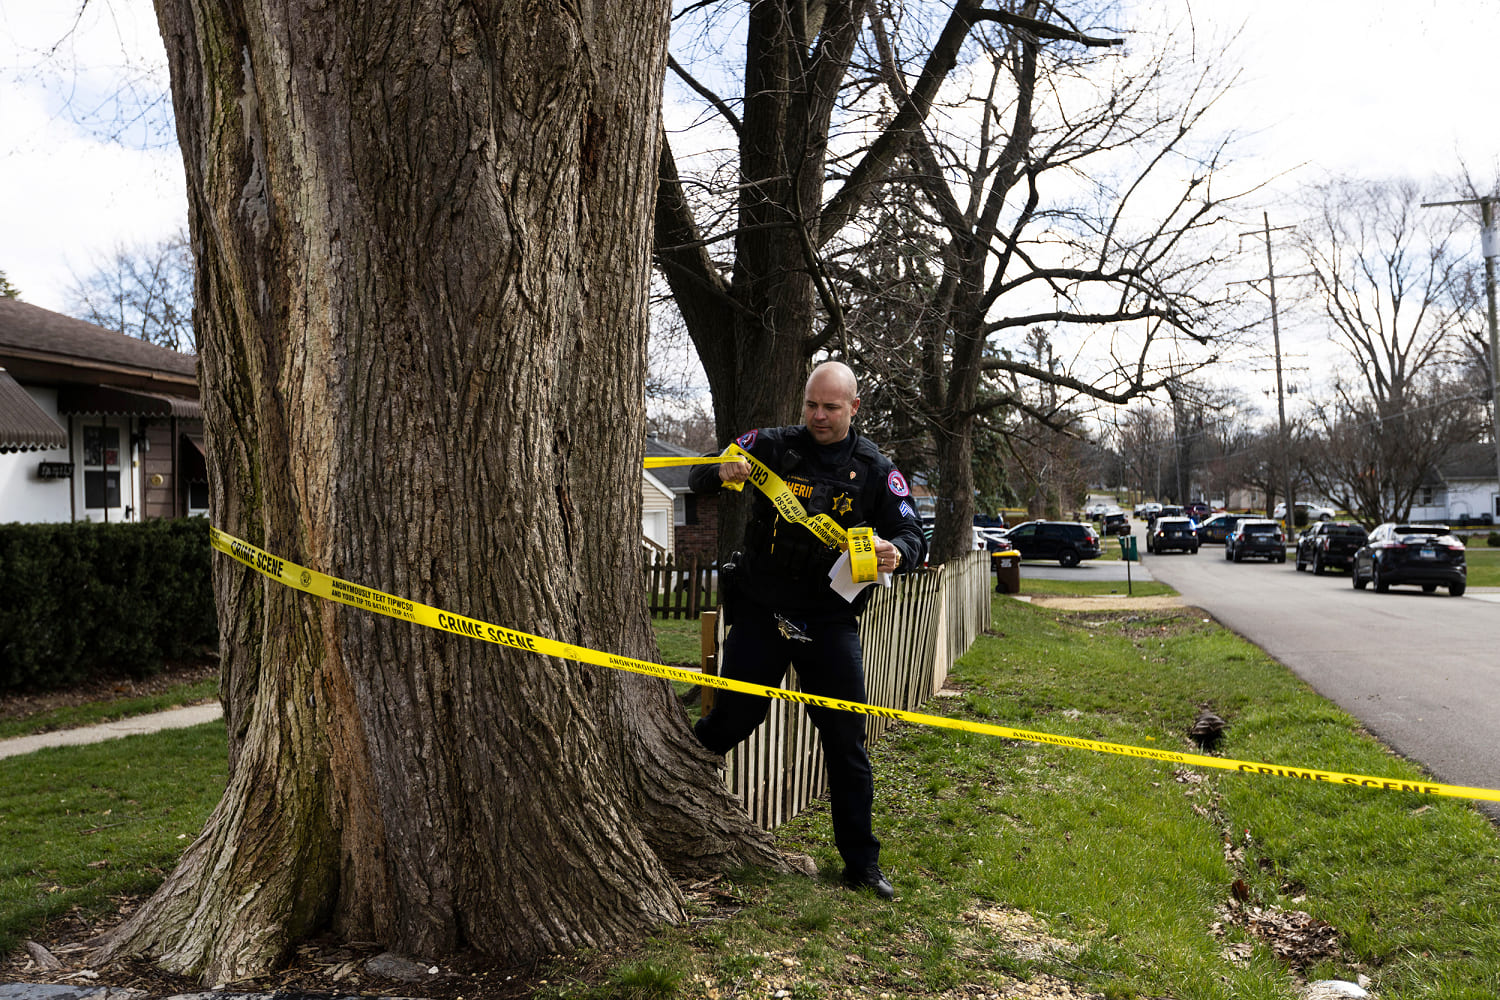 4 dead, suspect arrested in 'senseless' violence in Rockford, Illinois, officials say